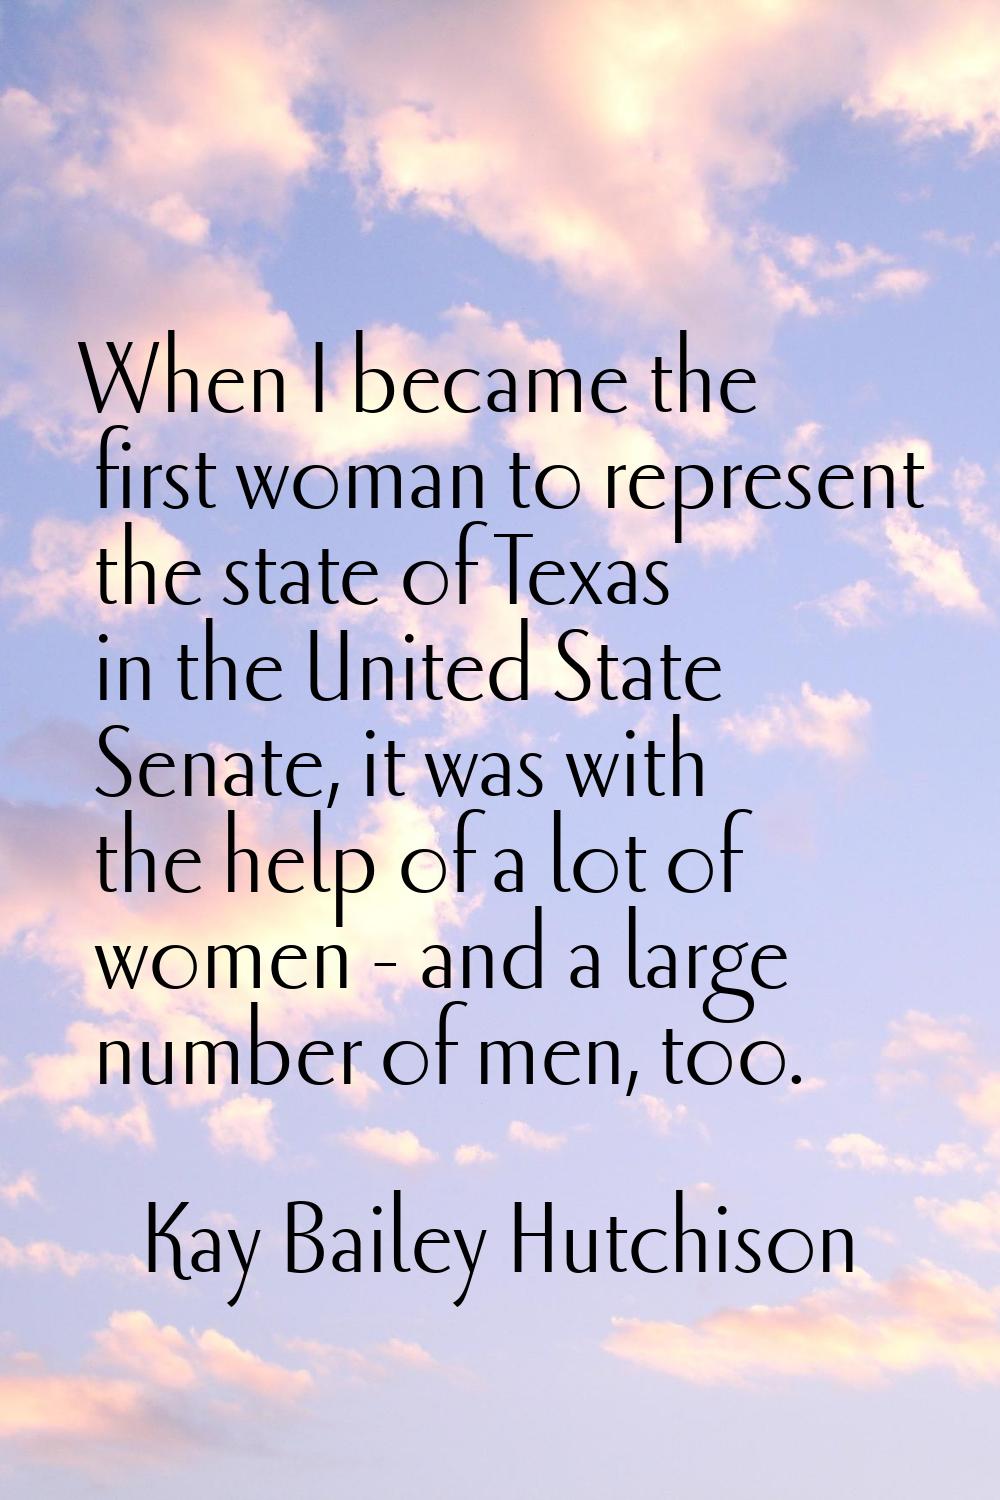 When I became the first woman to represent the state of Texas in the United State Senate, it was wi